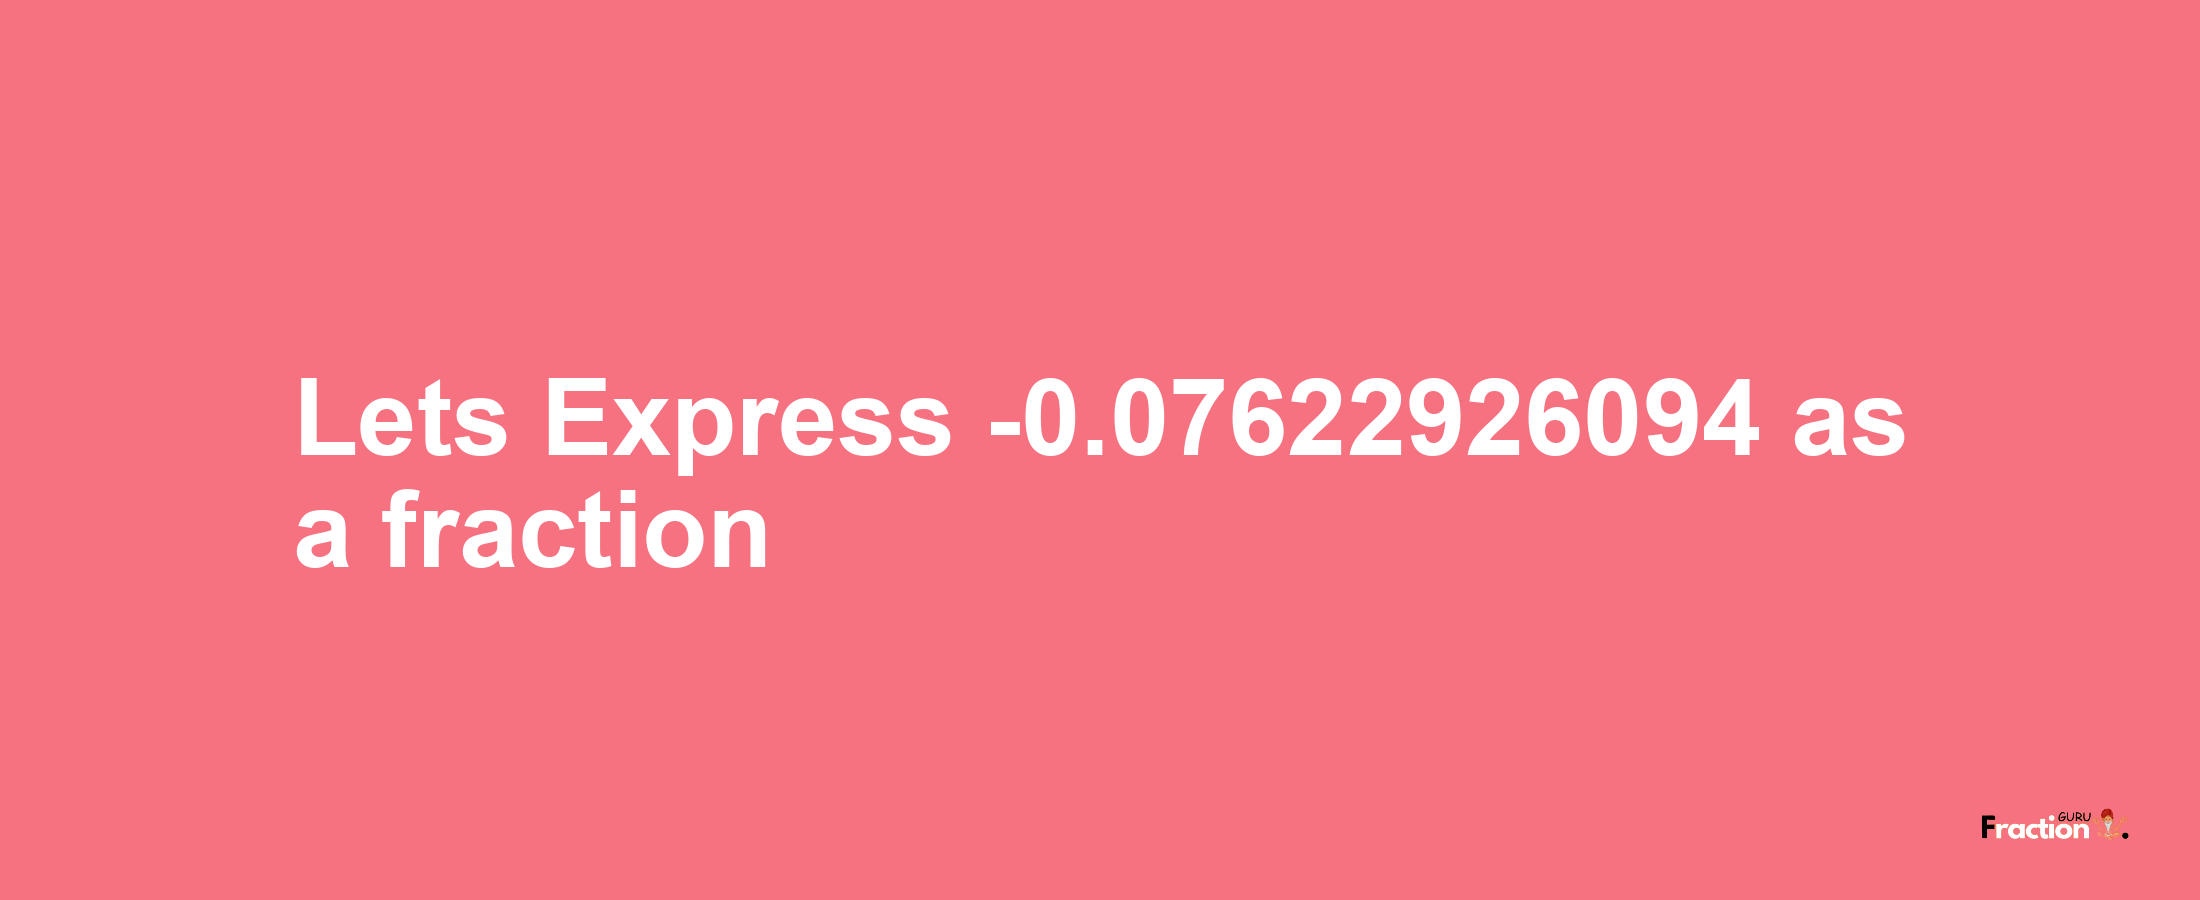 Lets Express -0.07622926094 as afraction